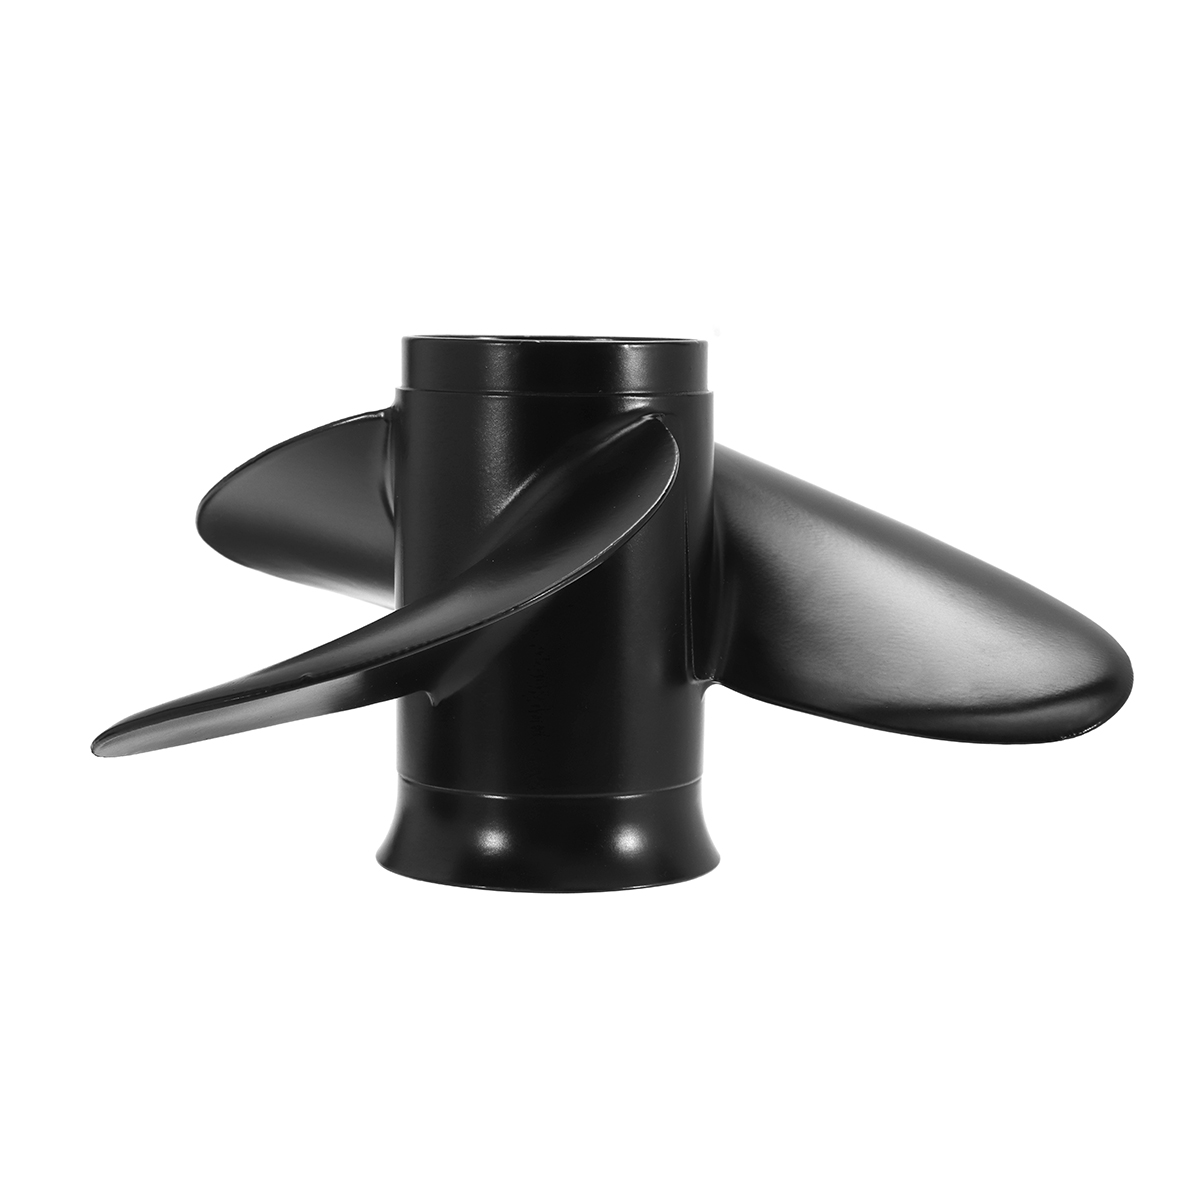 For Mercury/Tohatsu/Nissan 9.9-20HP 9.25 x 11 Outboard Propeller 48-897754A11 Aluminum Marine Propeller 14 Spline Tooth 3 Blades